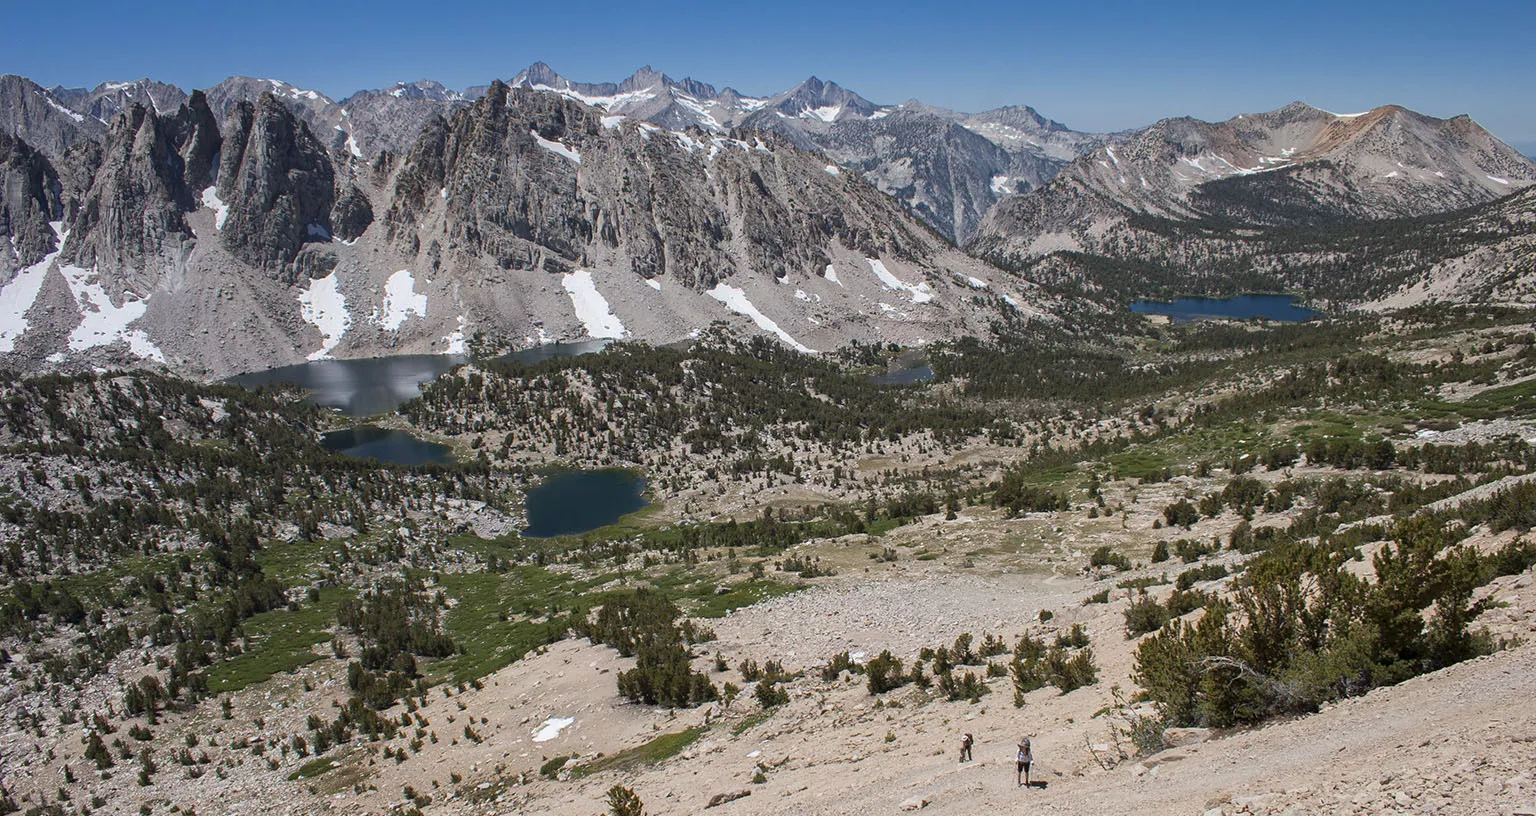 Looking down from Kearsarge Pass. Kearsarge Lakes on the left, Bullfrog Lake in the distance.